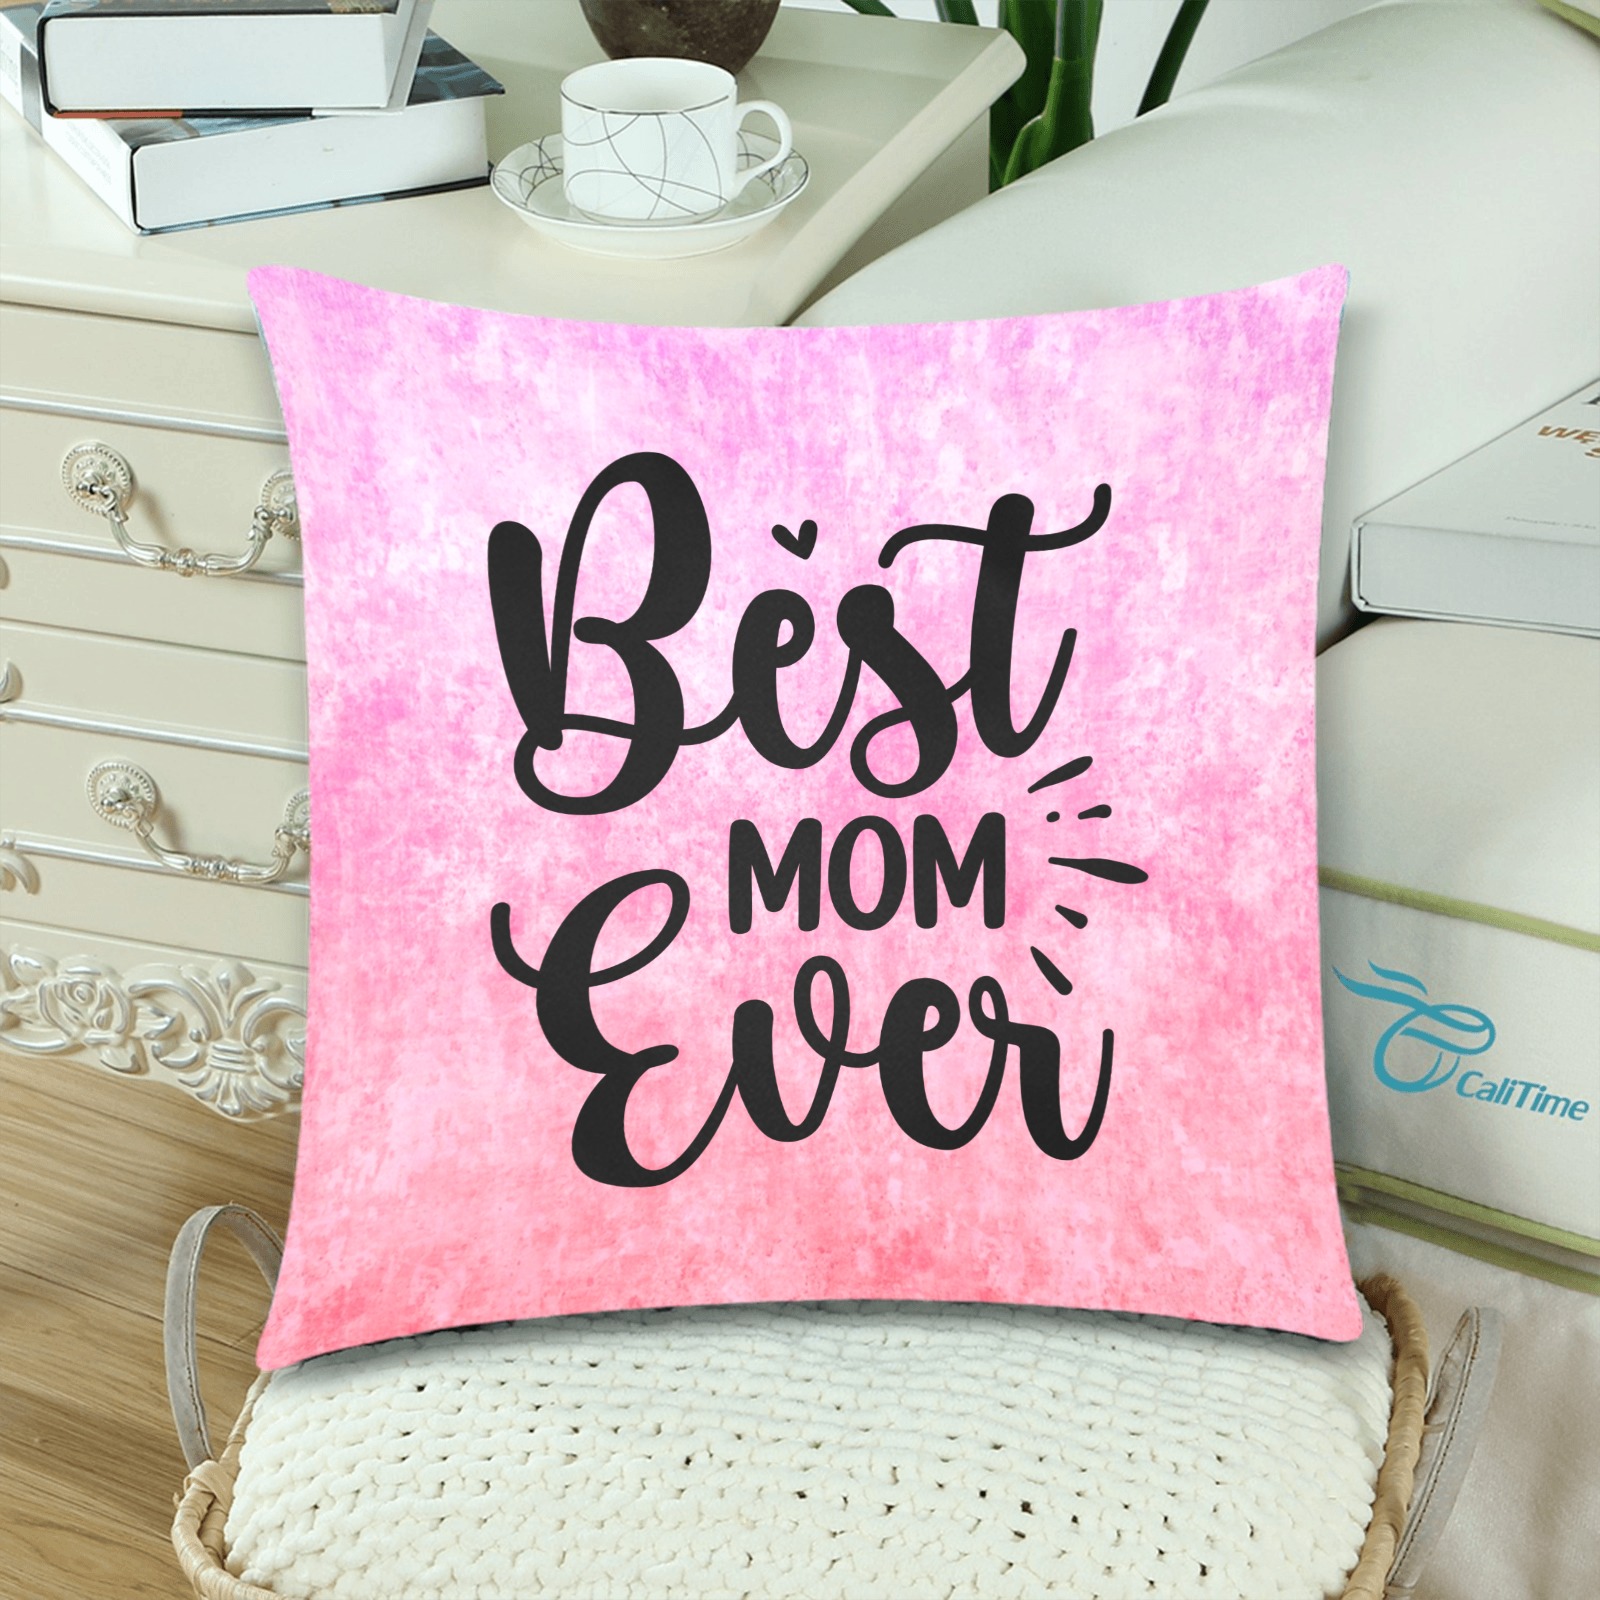 Best Mom Ever - Pink Custom Zippered Pillow Cases 18"x 18" (Twin Sides) (Set of 2)